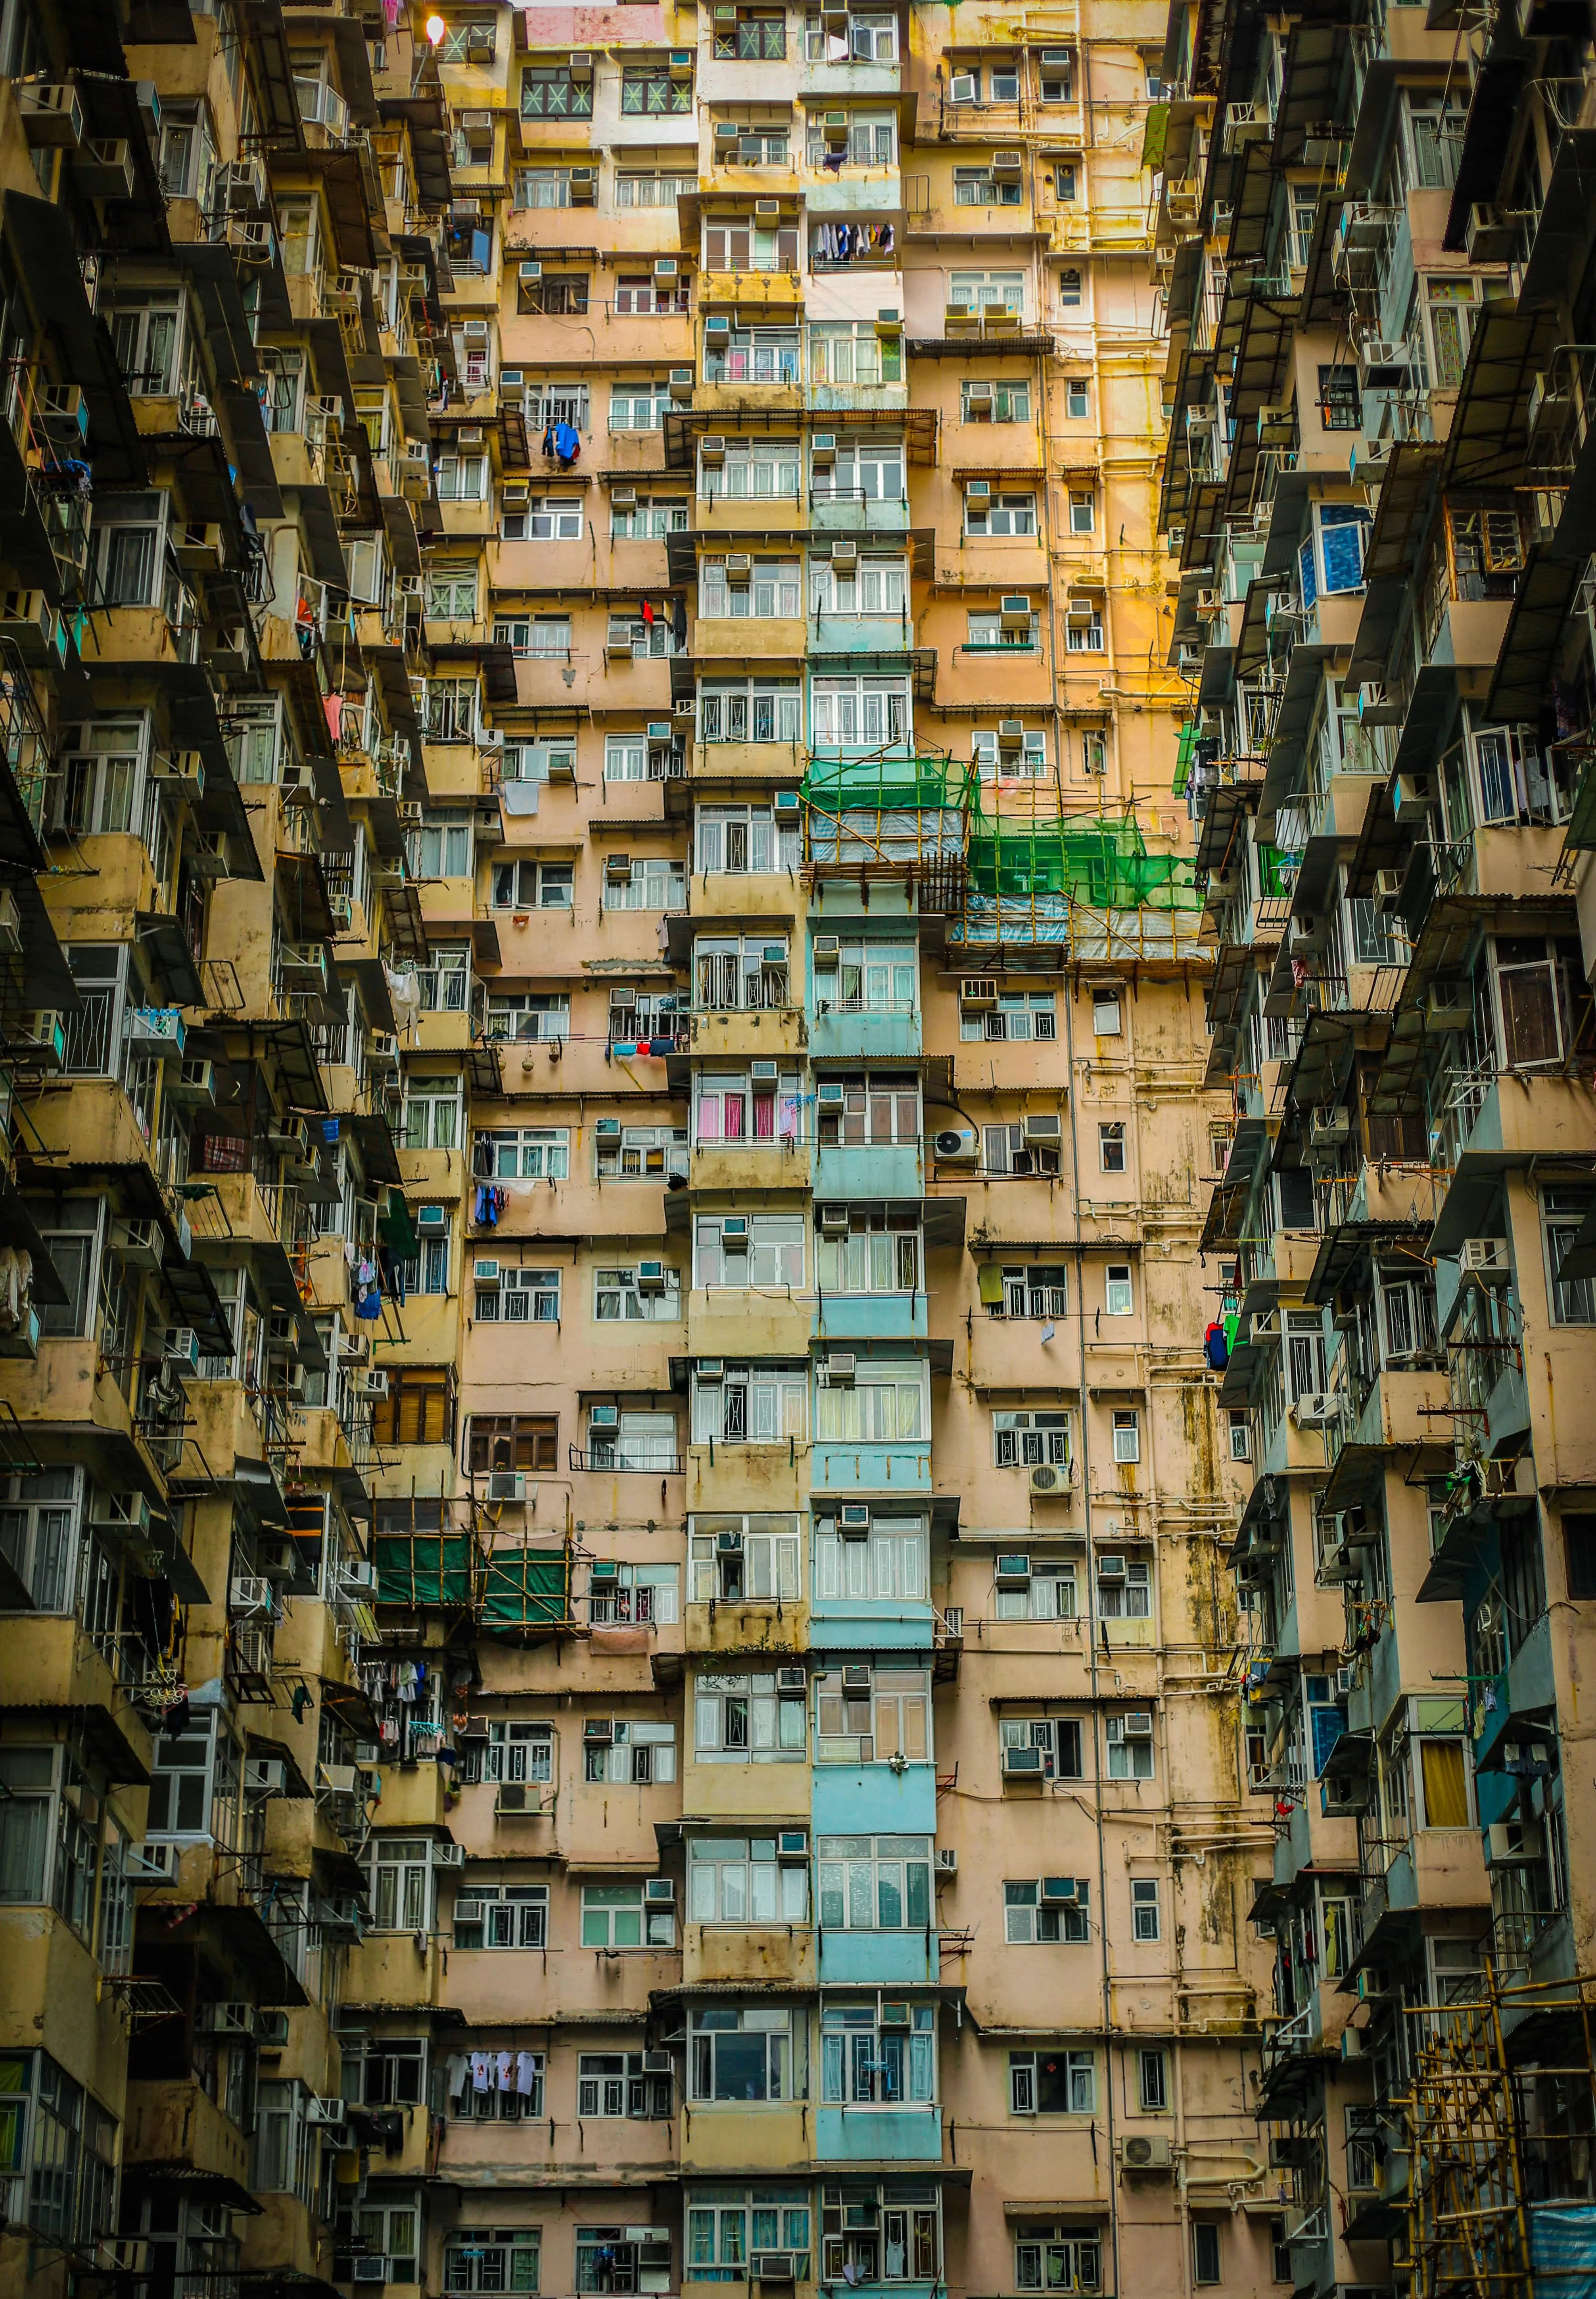 Instagrammable Places in Hong Kong, Quarry Bay